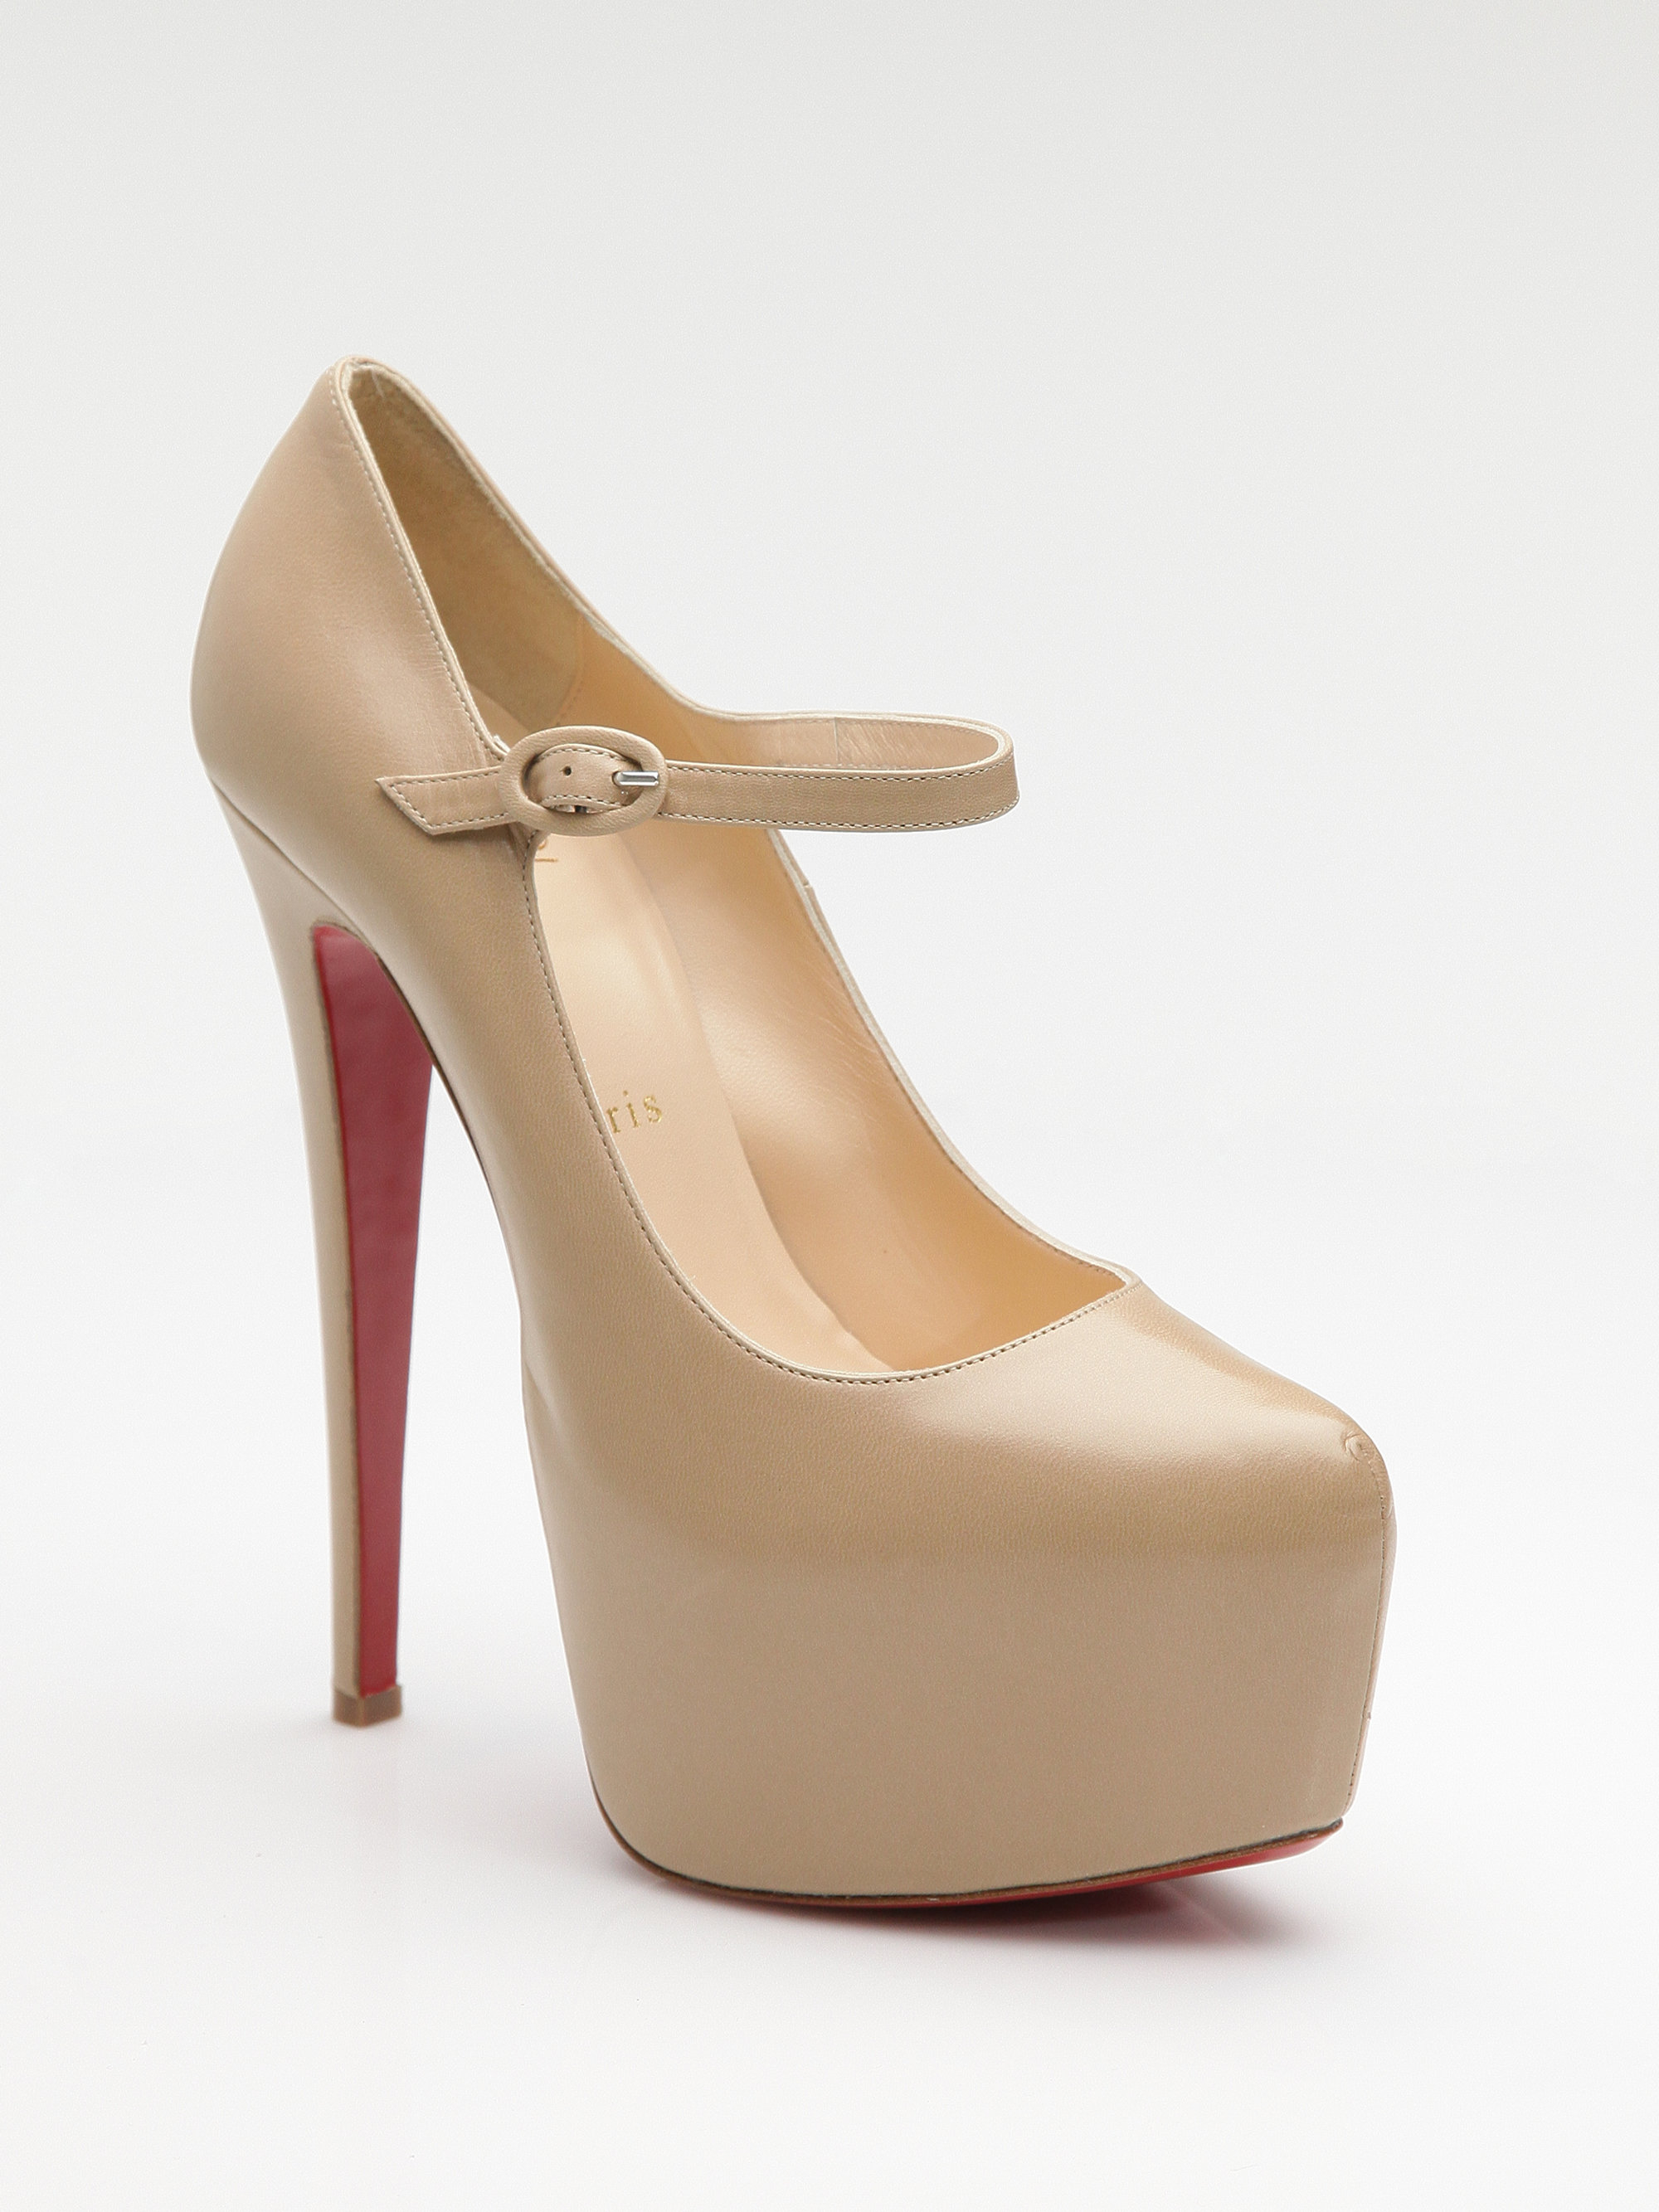 Christian Louboutin Lady Daf Platform Mary Jane Pumps in Natural | Lyst